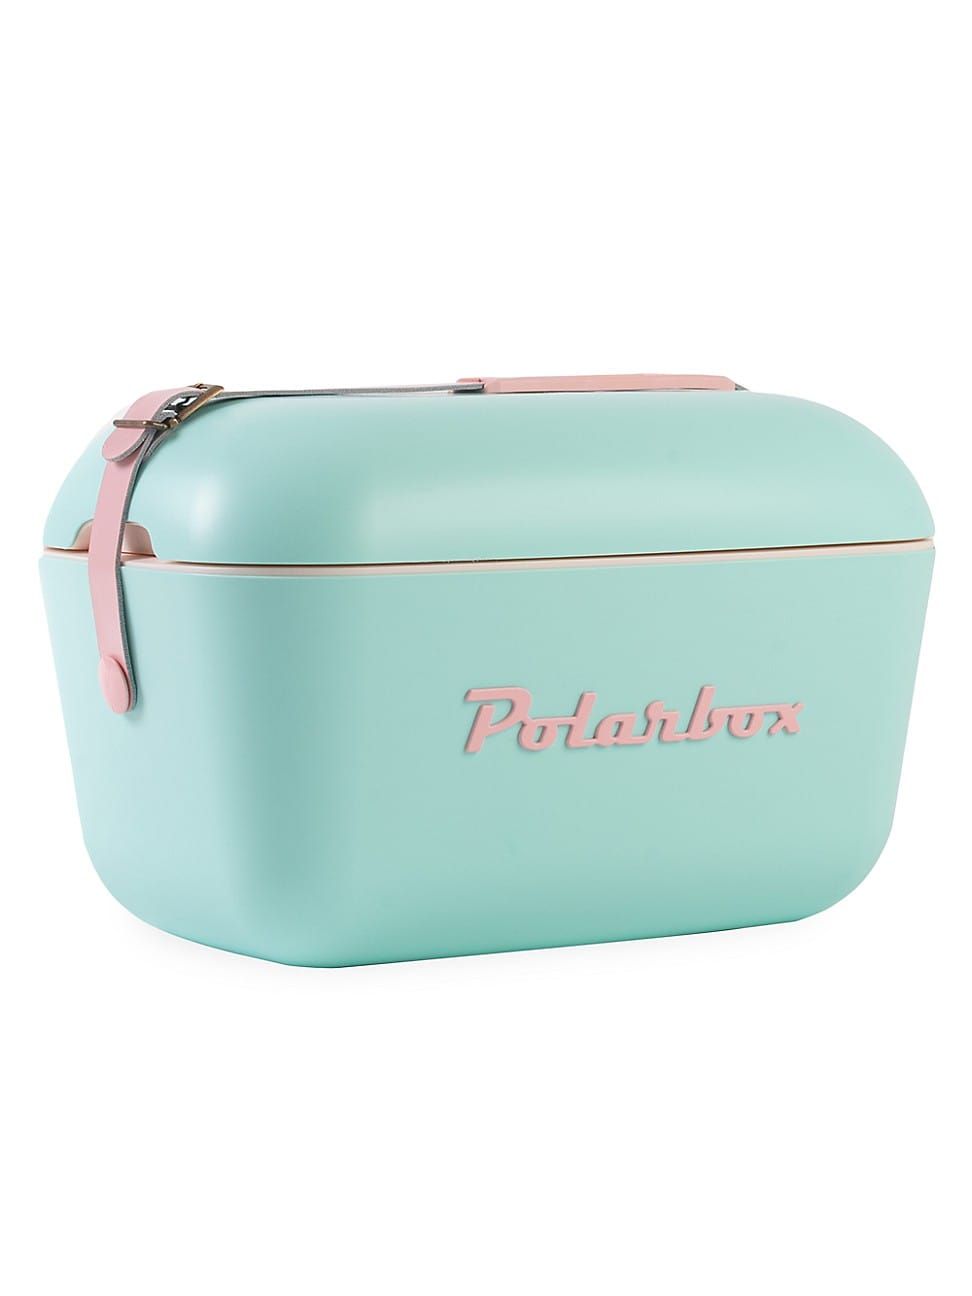 Polarbox Portable Cooler - Cyan Baby Rose | Saks Fifth Avenue